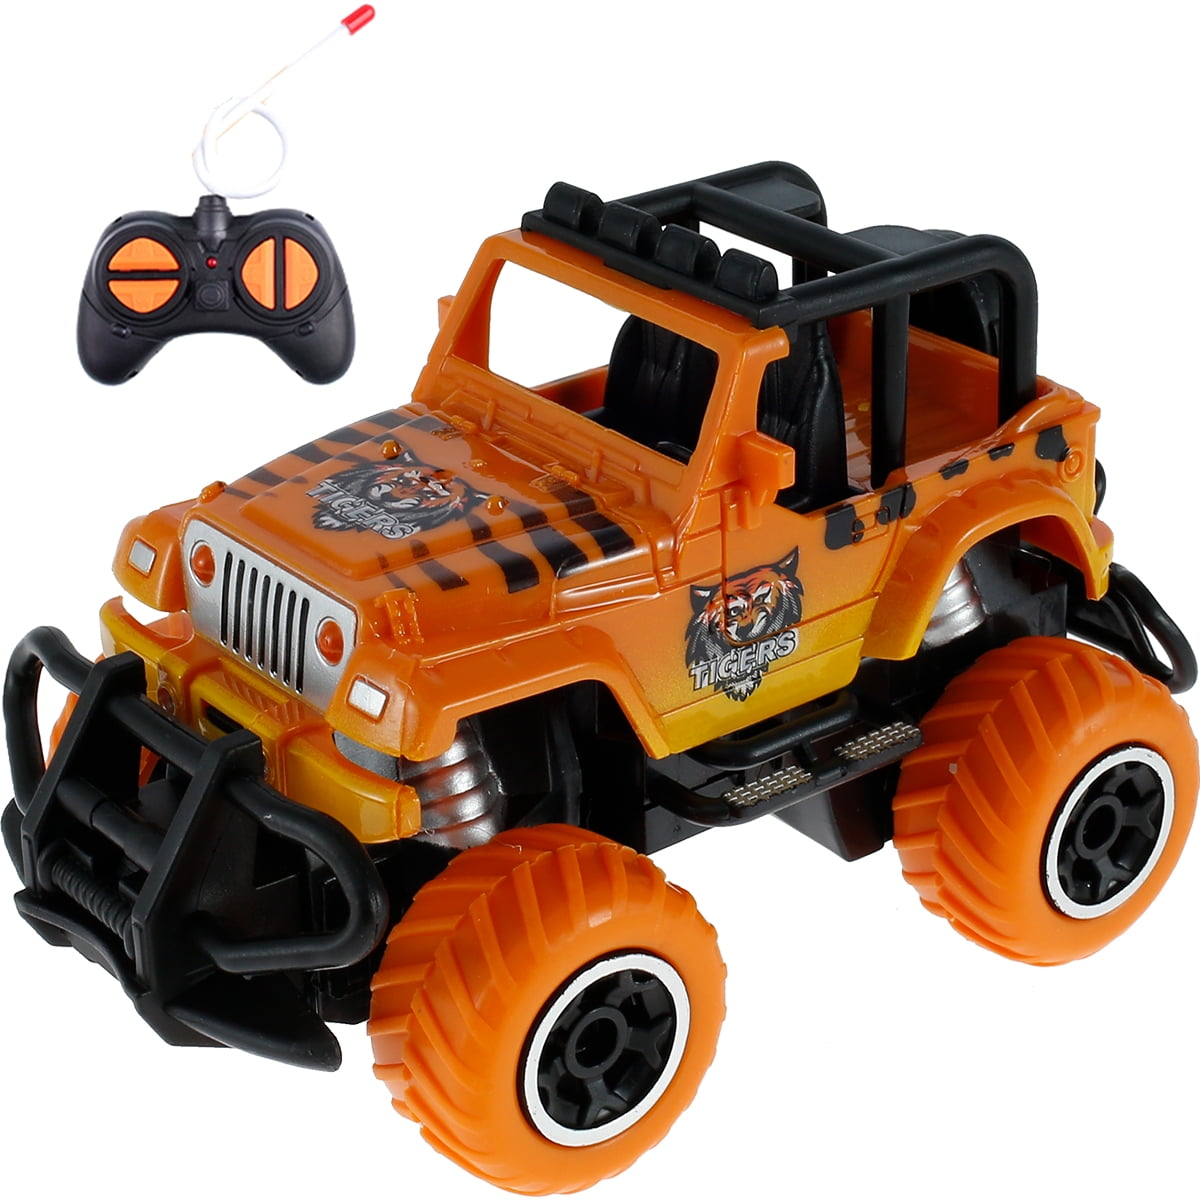 Details about   1:18 RC Car Scale Remote Control Car 40+km/h High Speed Off Road Vehicle Toys 